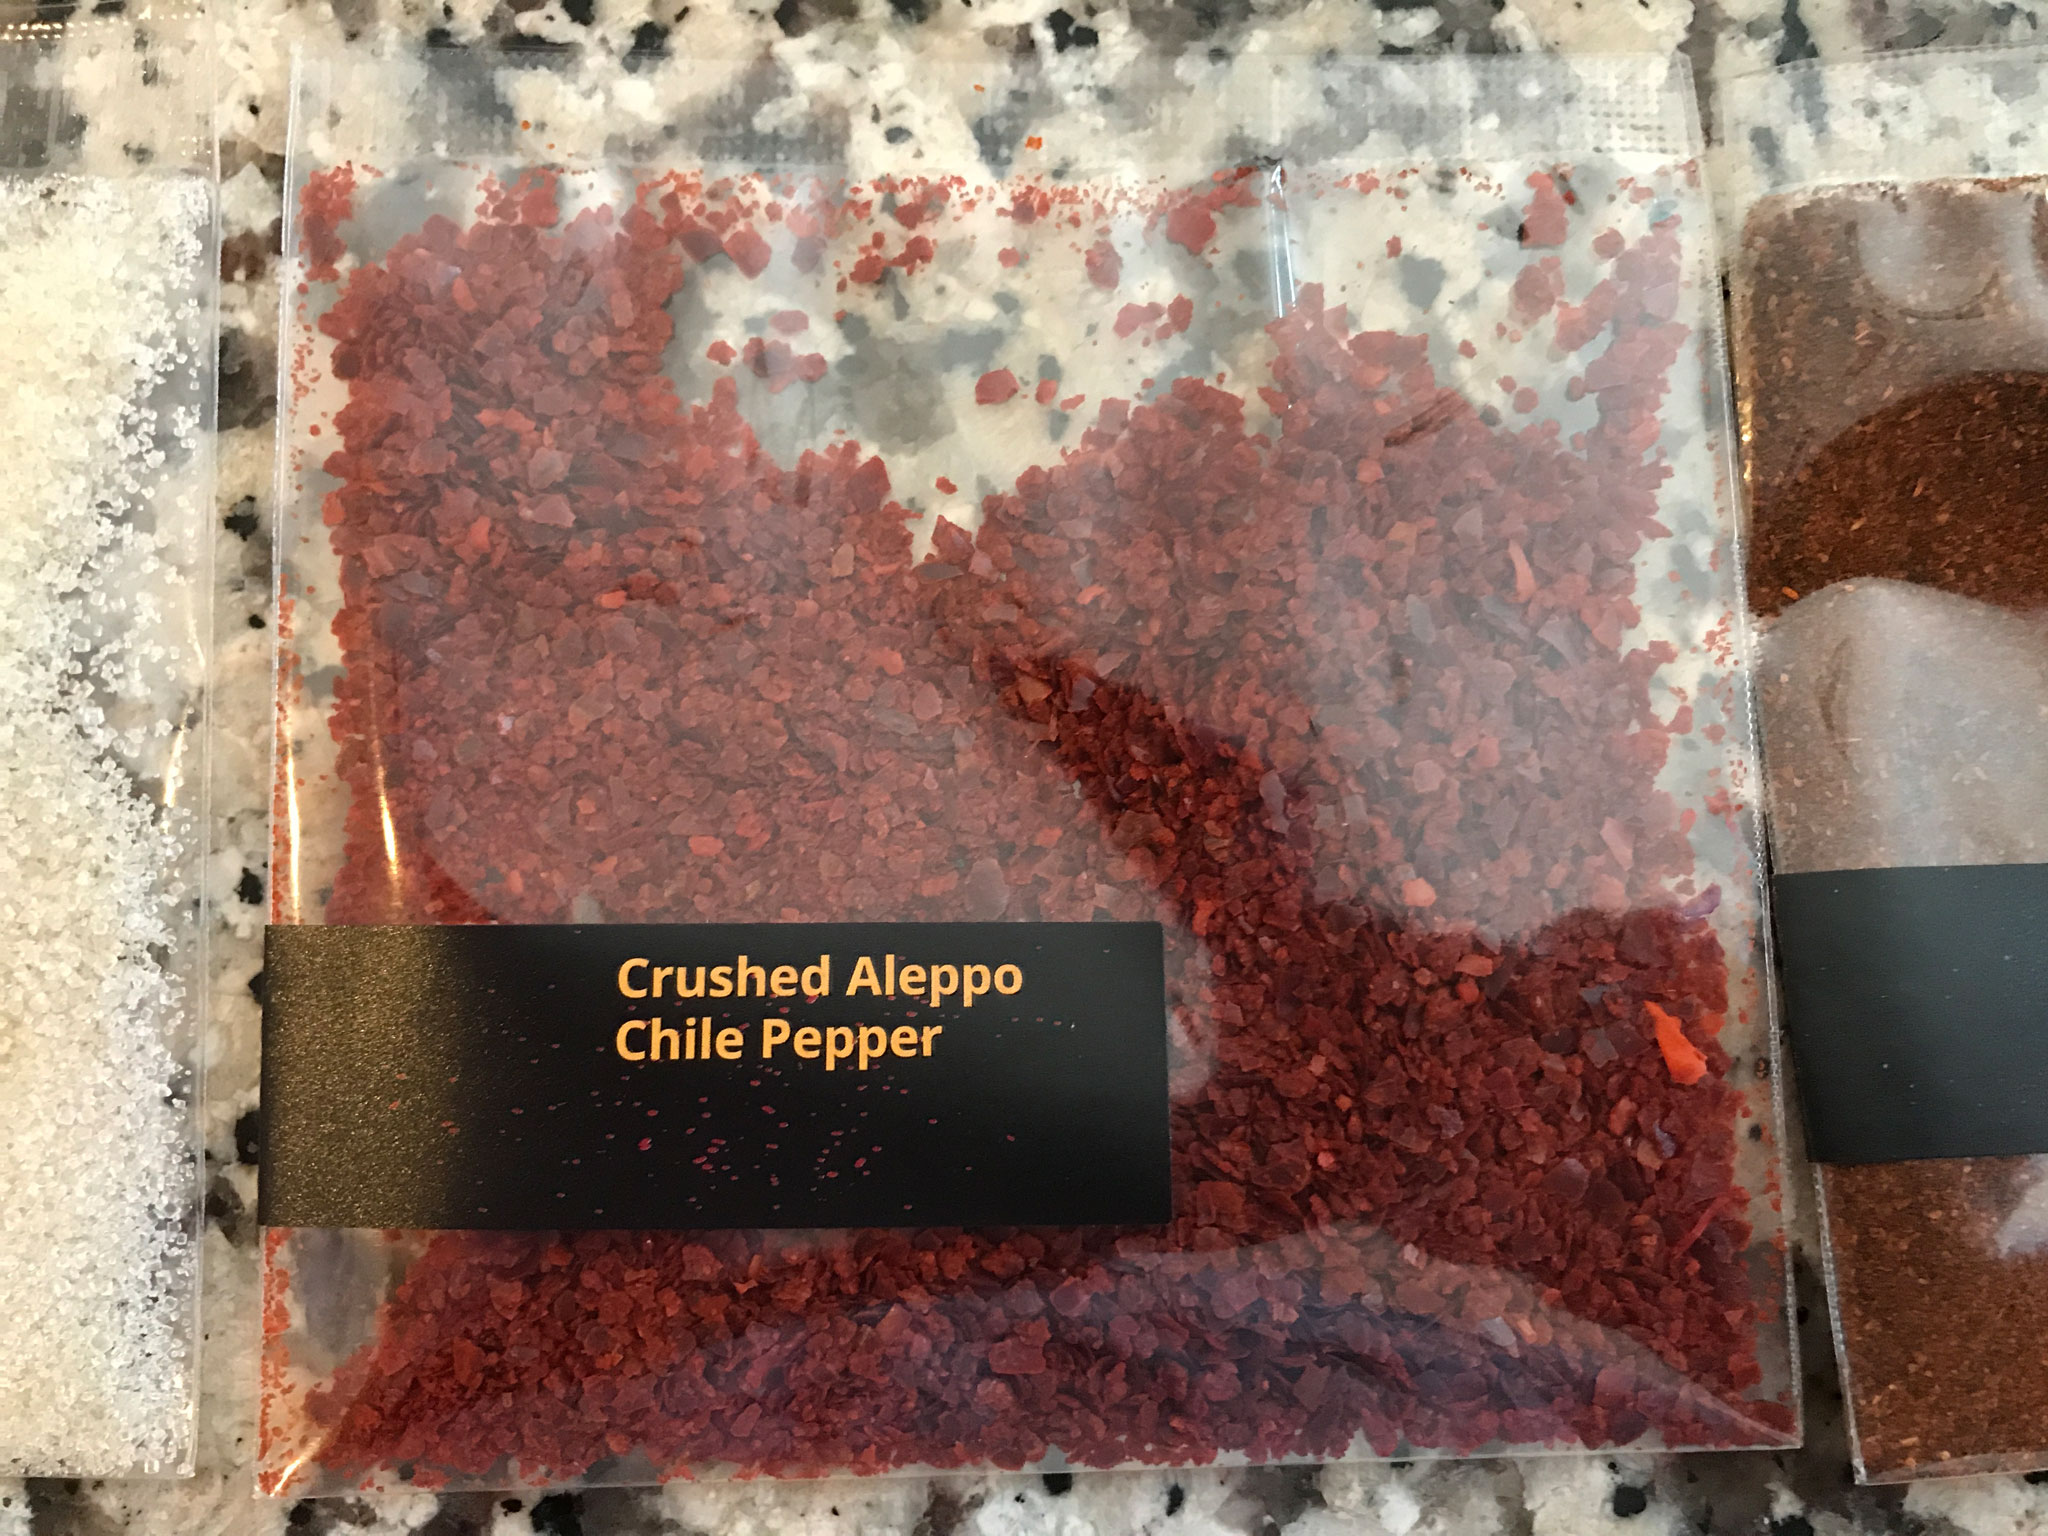 Crushed Aleppo Chili Peppers